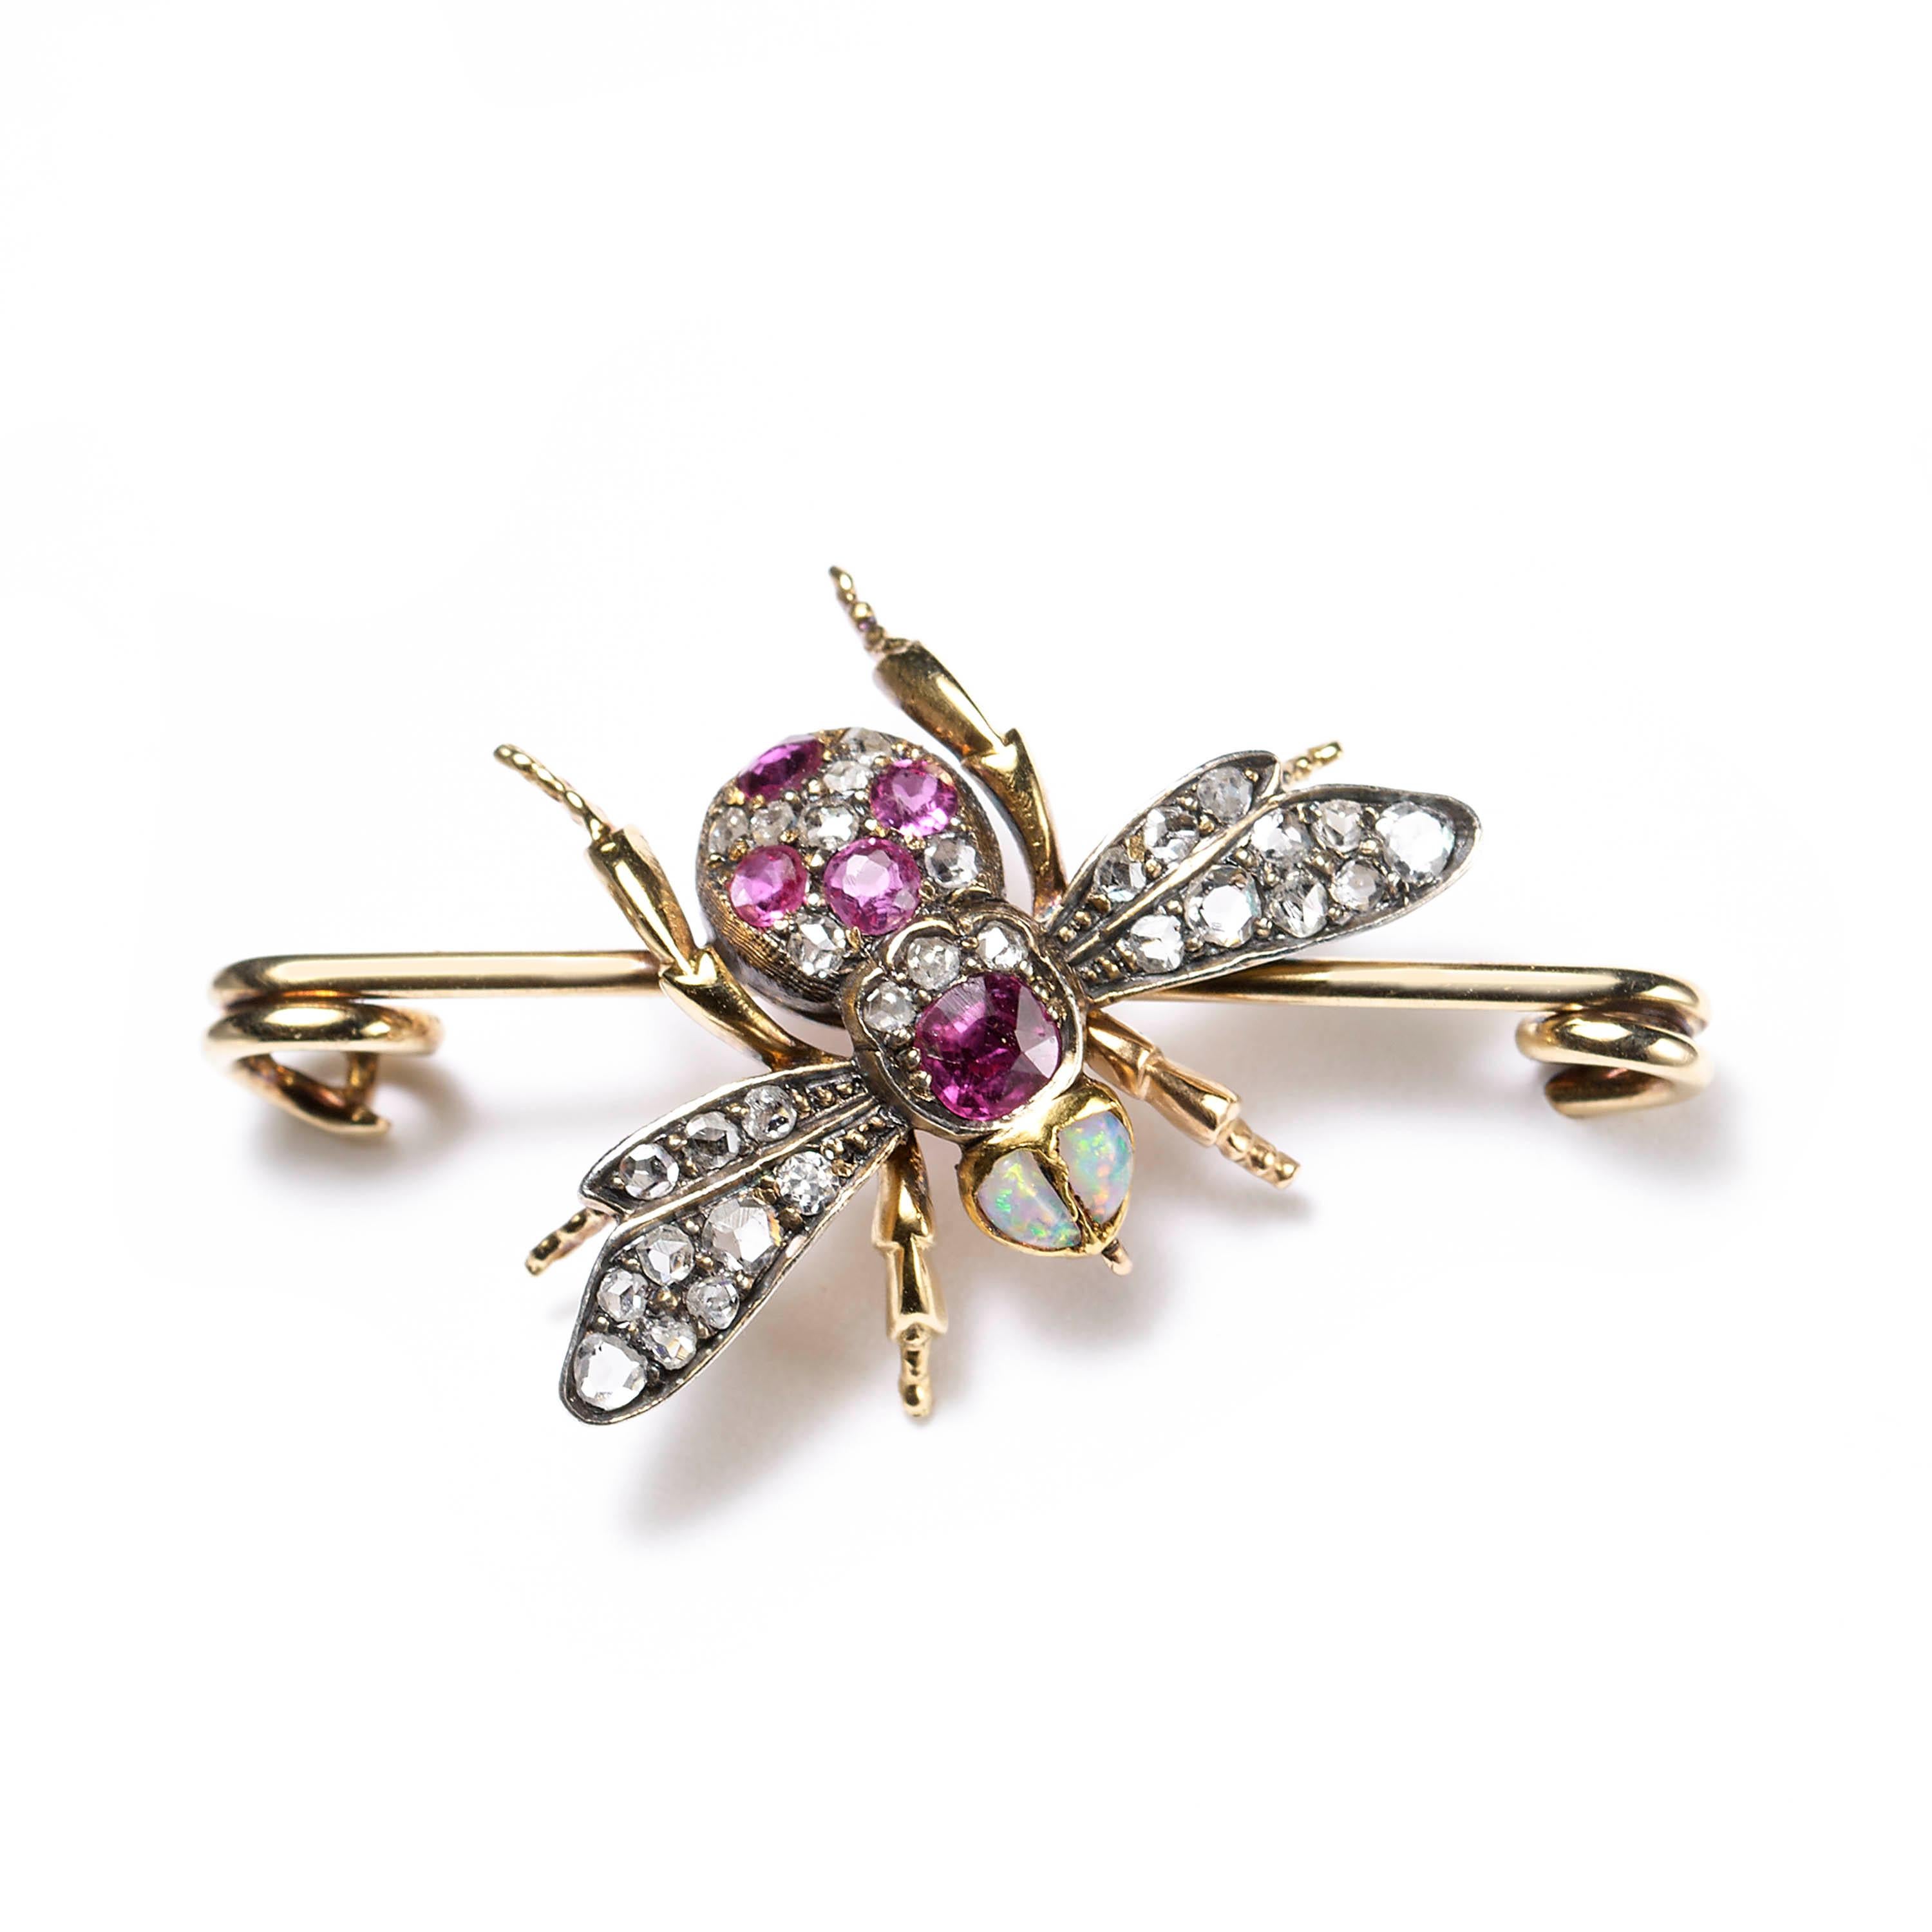 Victorian Antique Diamond, Ruby and Opal Bee Brooch, circa 1880